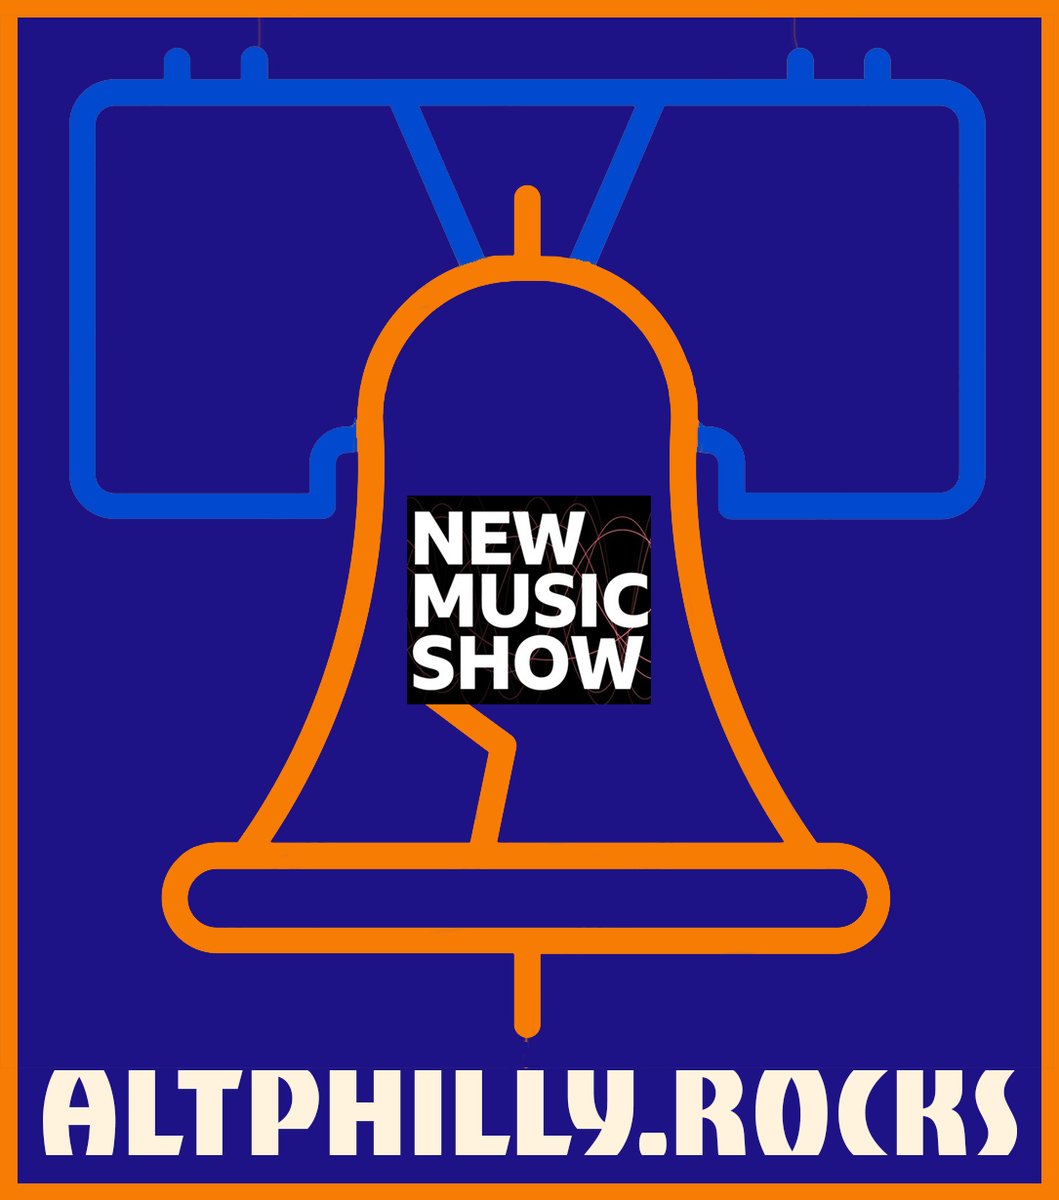 Thanks to AltPhillyRocks New Music Show (Philly) Arwen Lewis Show (Santa Barbara) Love FM (Japan) Music Expo (United Kingdom) Rock Never Rusts (Boston) Spark (New Jersey) for adding @SpeedfossilRock 'IRL' to your stations. @TheSoundCove